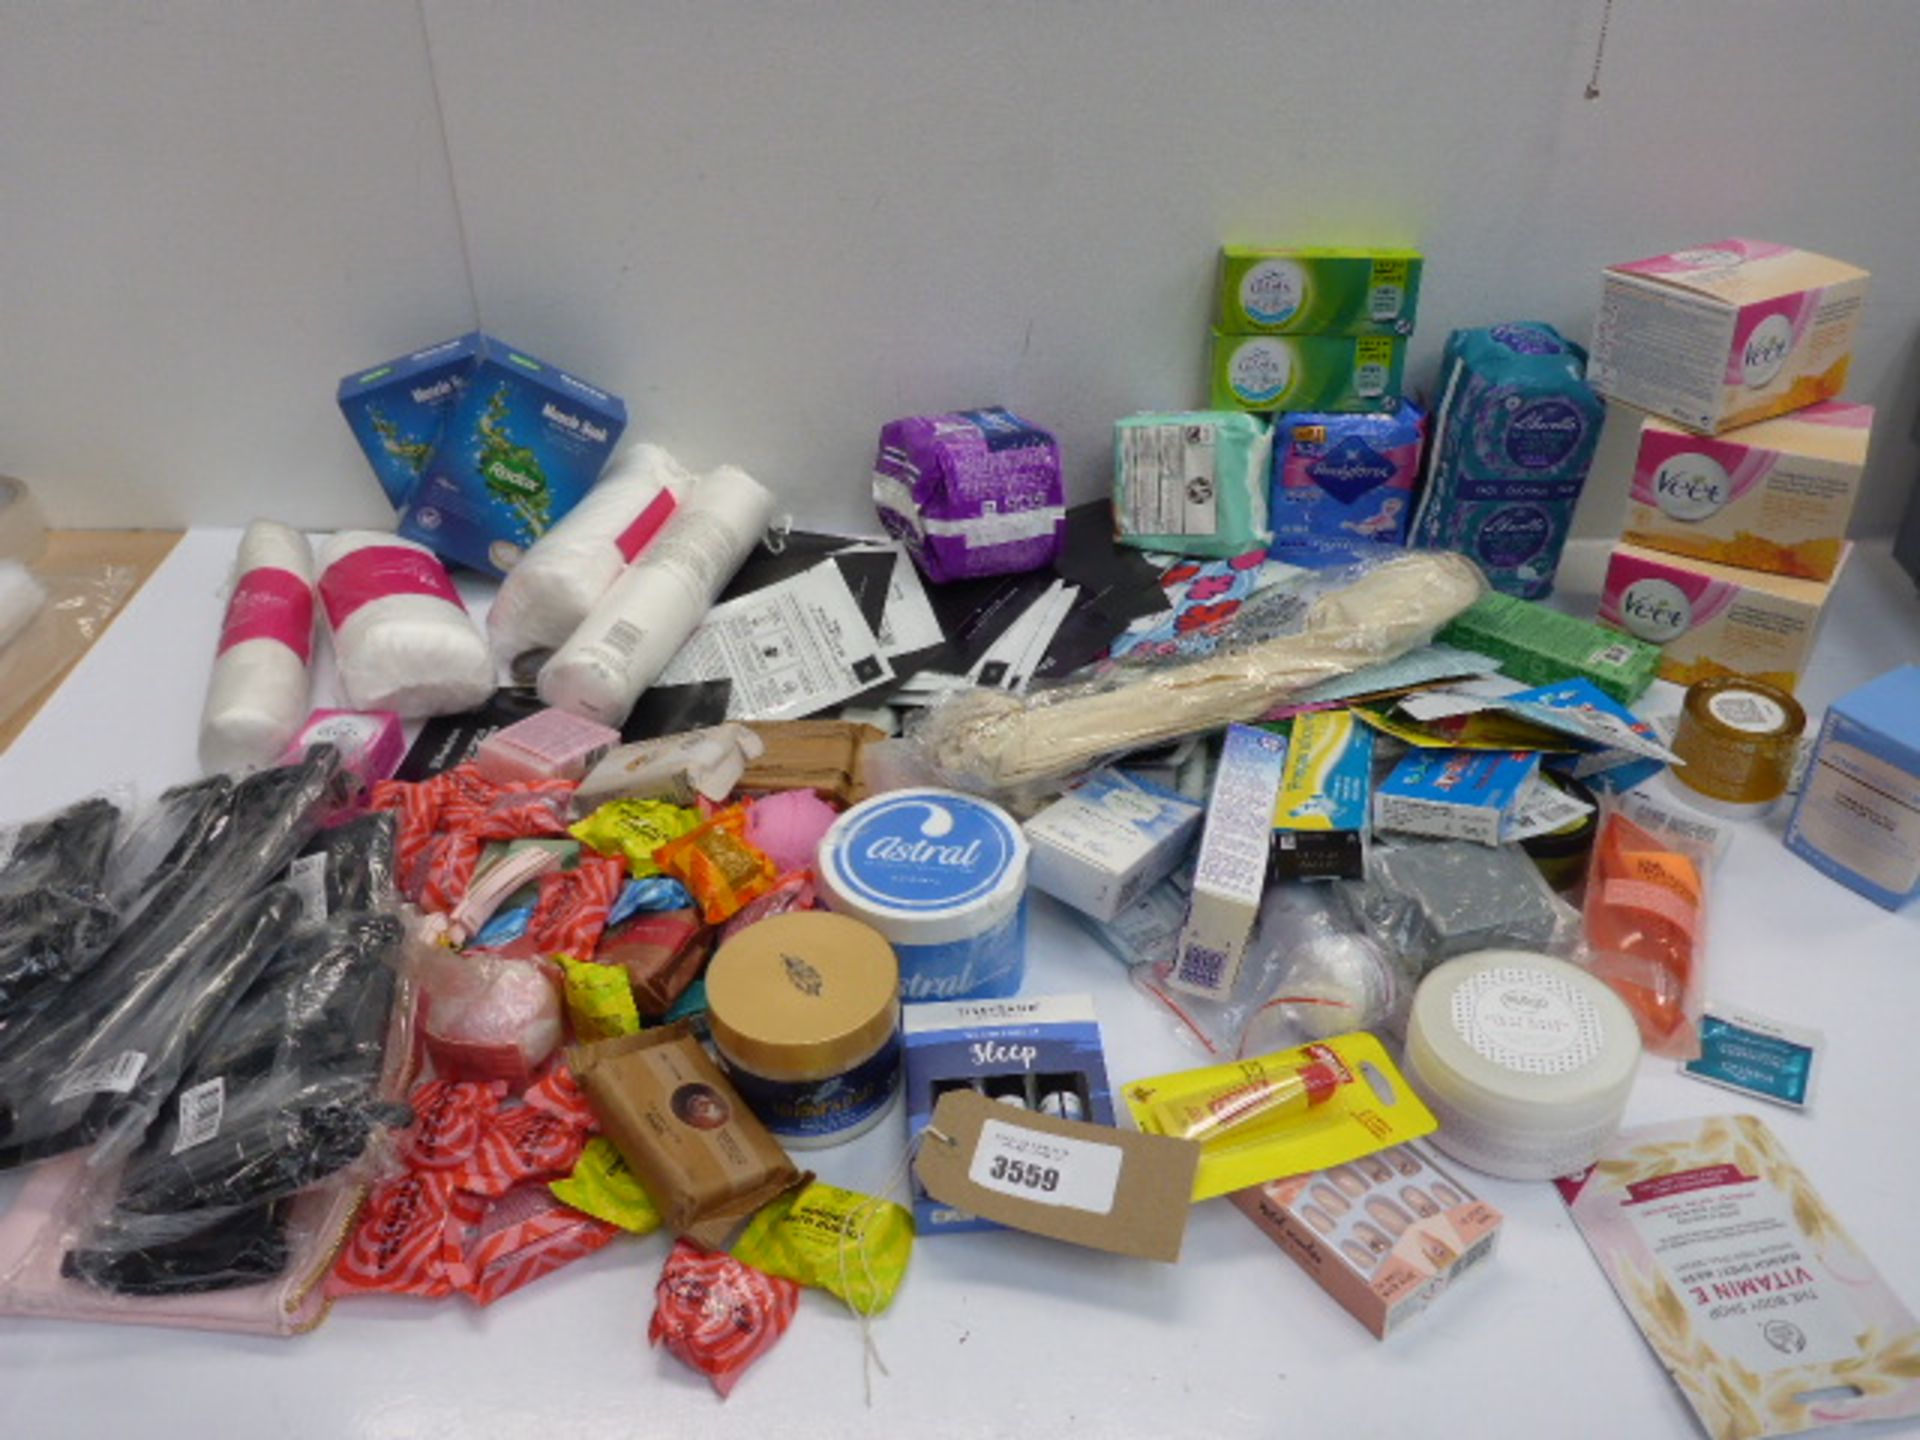 Bag of beauty products including muscle soak, Lil-ets, sanitary towels, Veet warm wax, bath bombs,